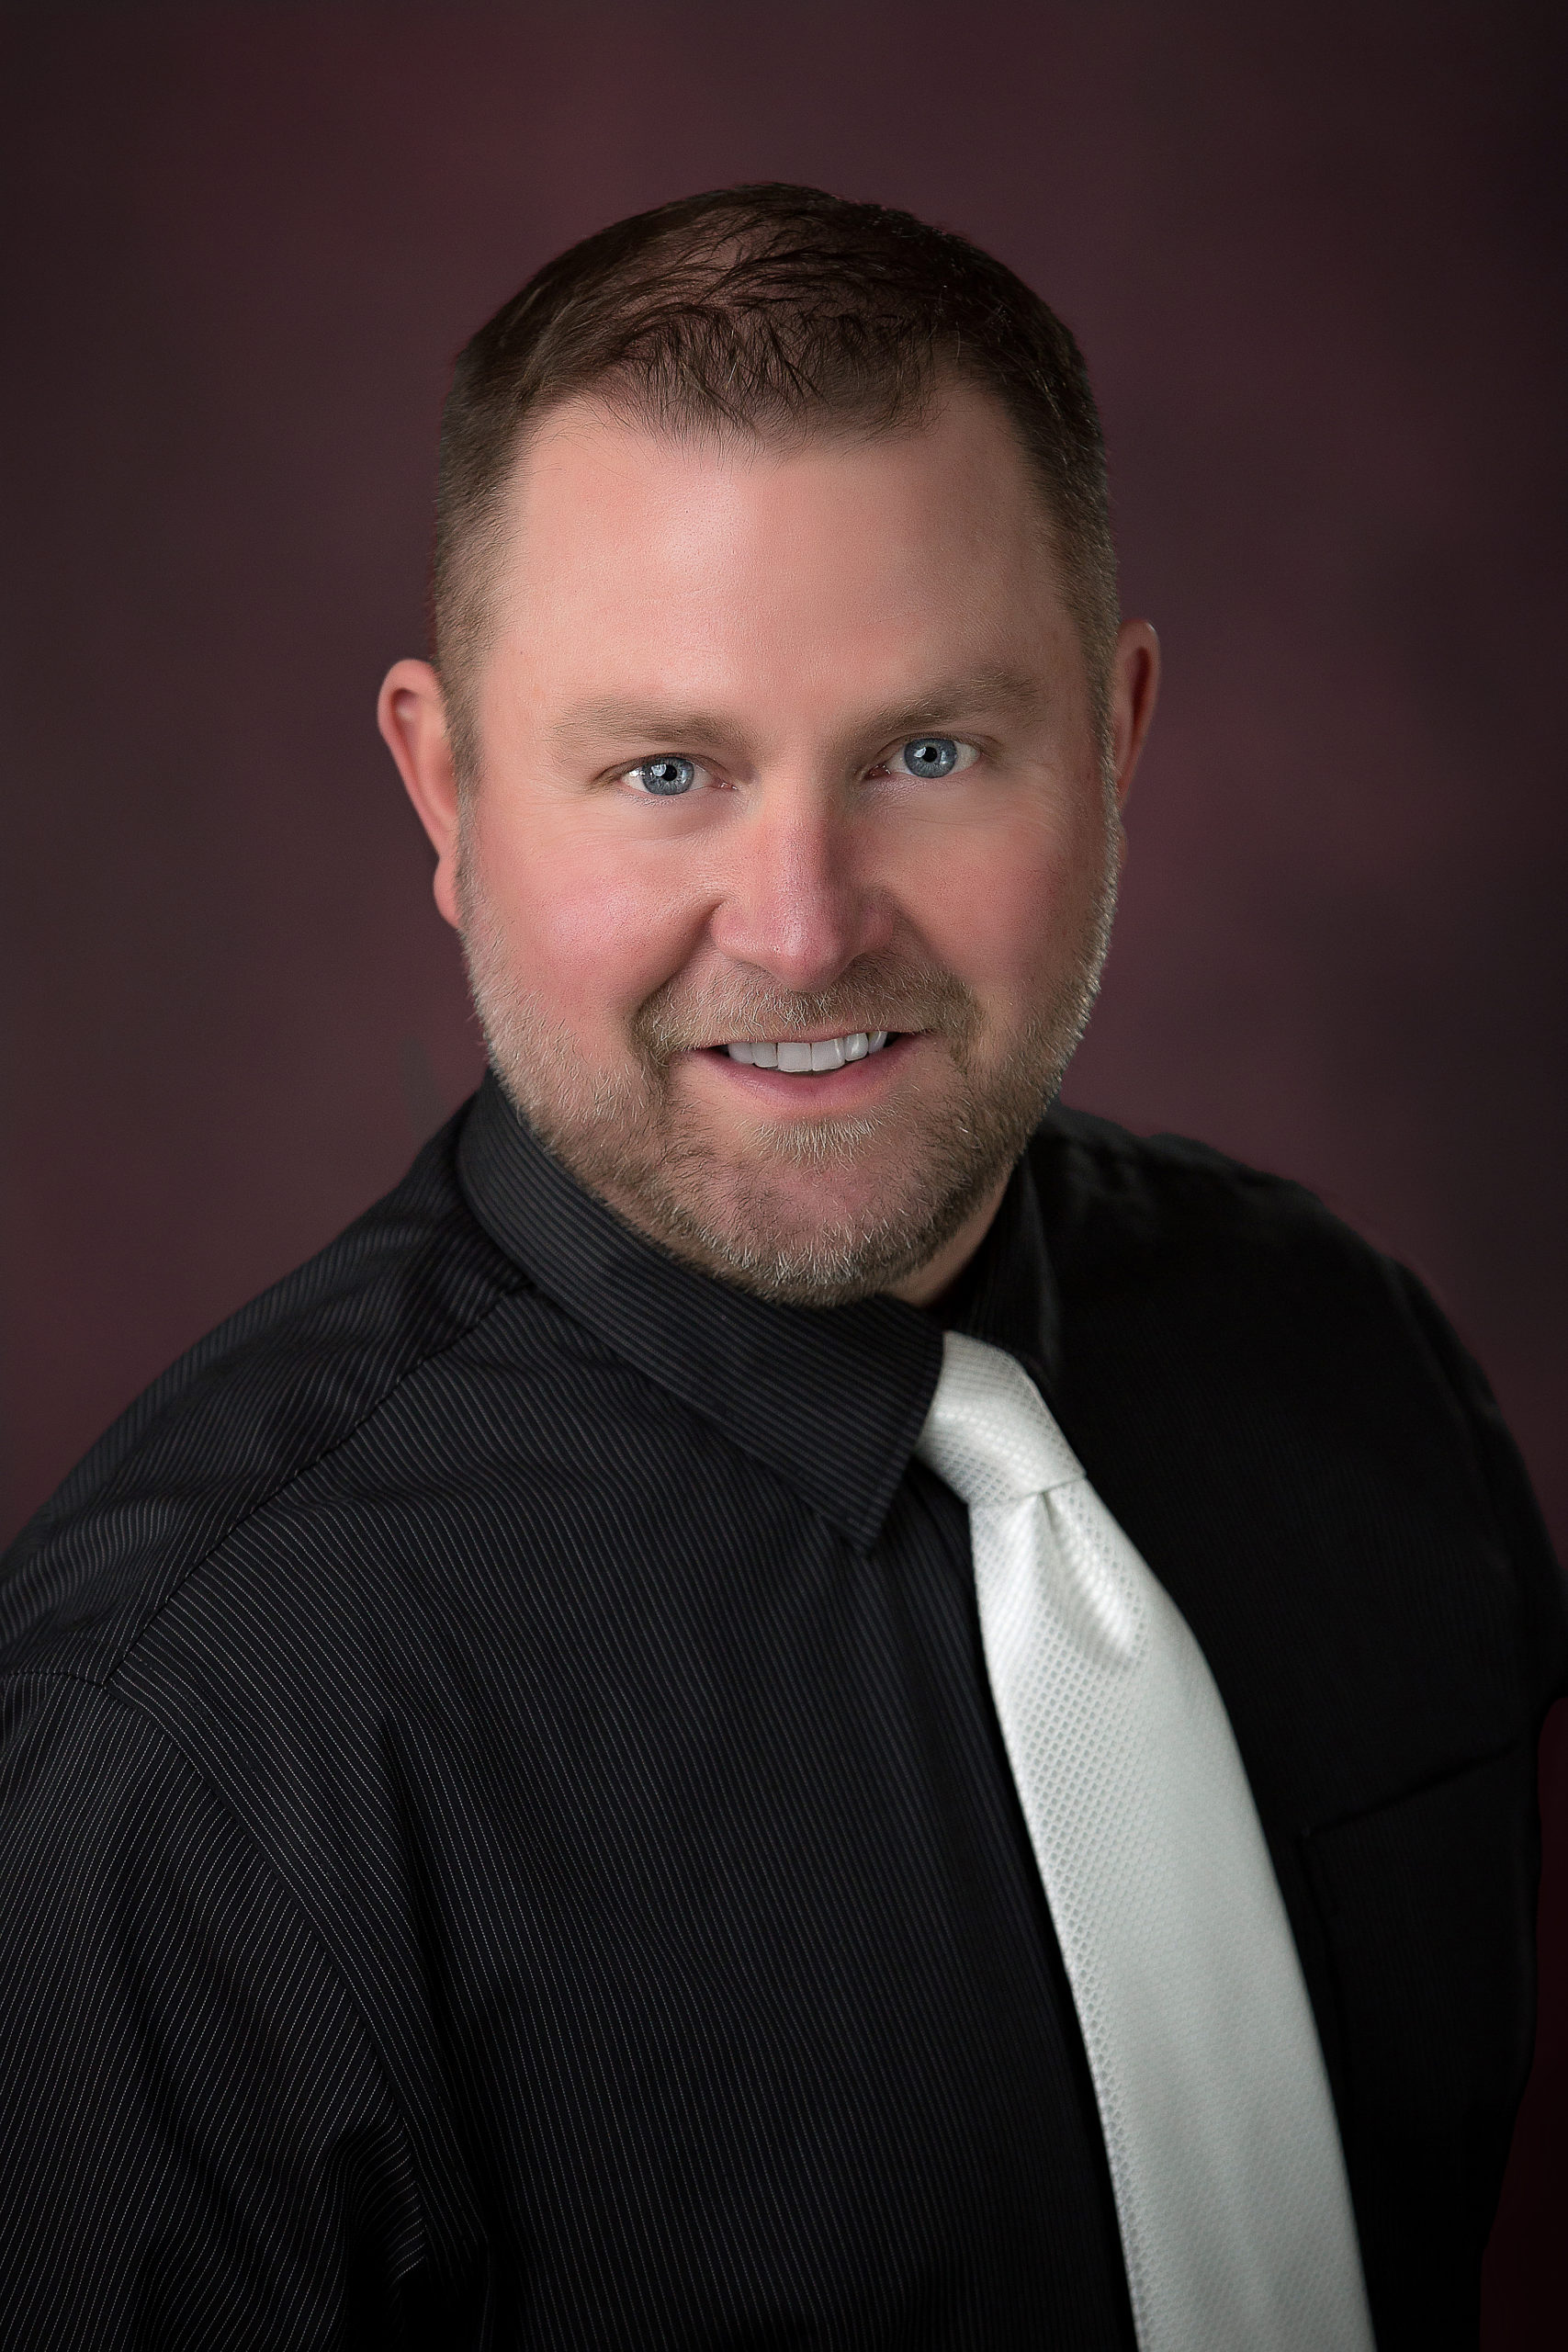 Dr. Shane Smith from Family Medical Specialty medical clinic in Holdrege Nebraska